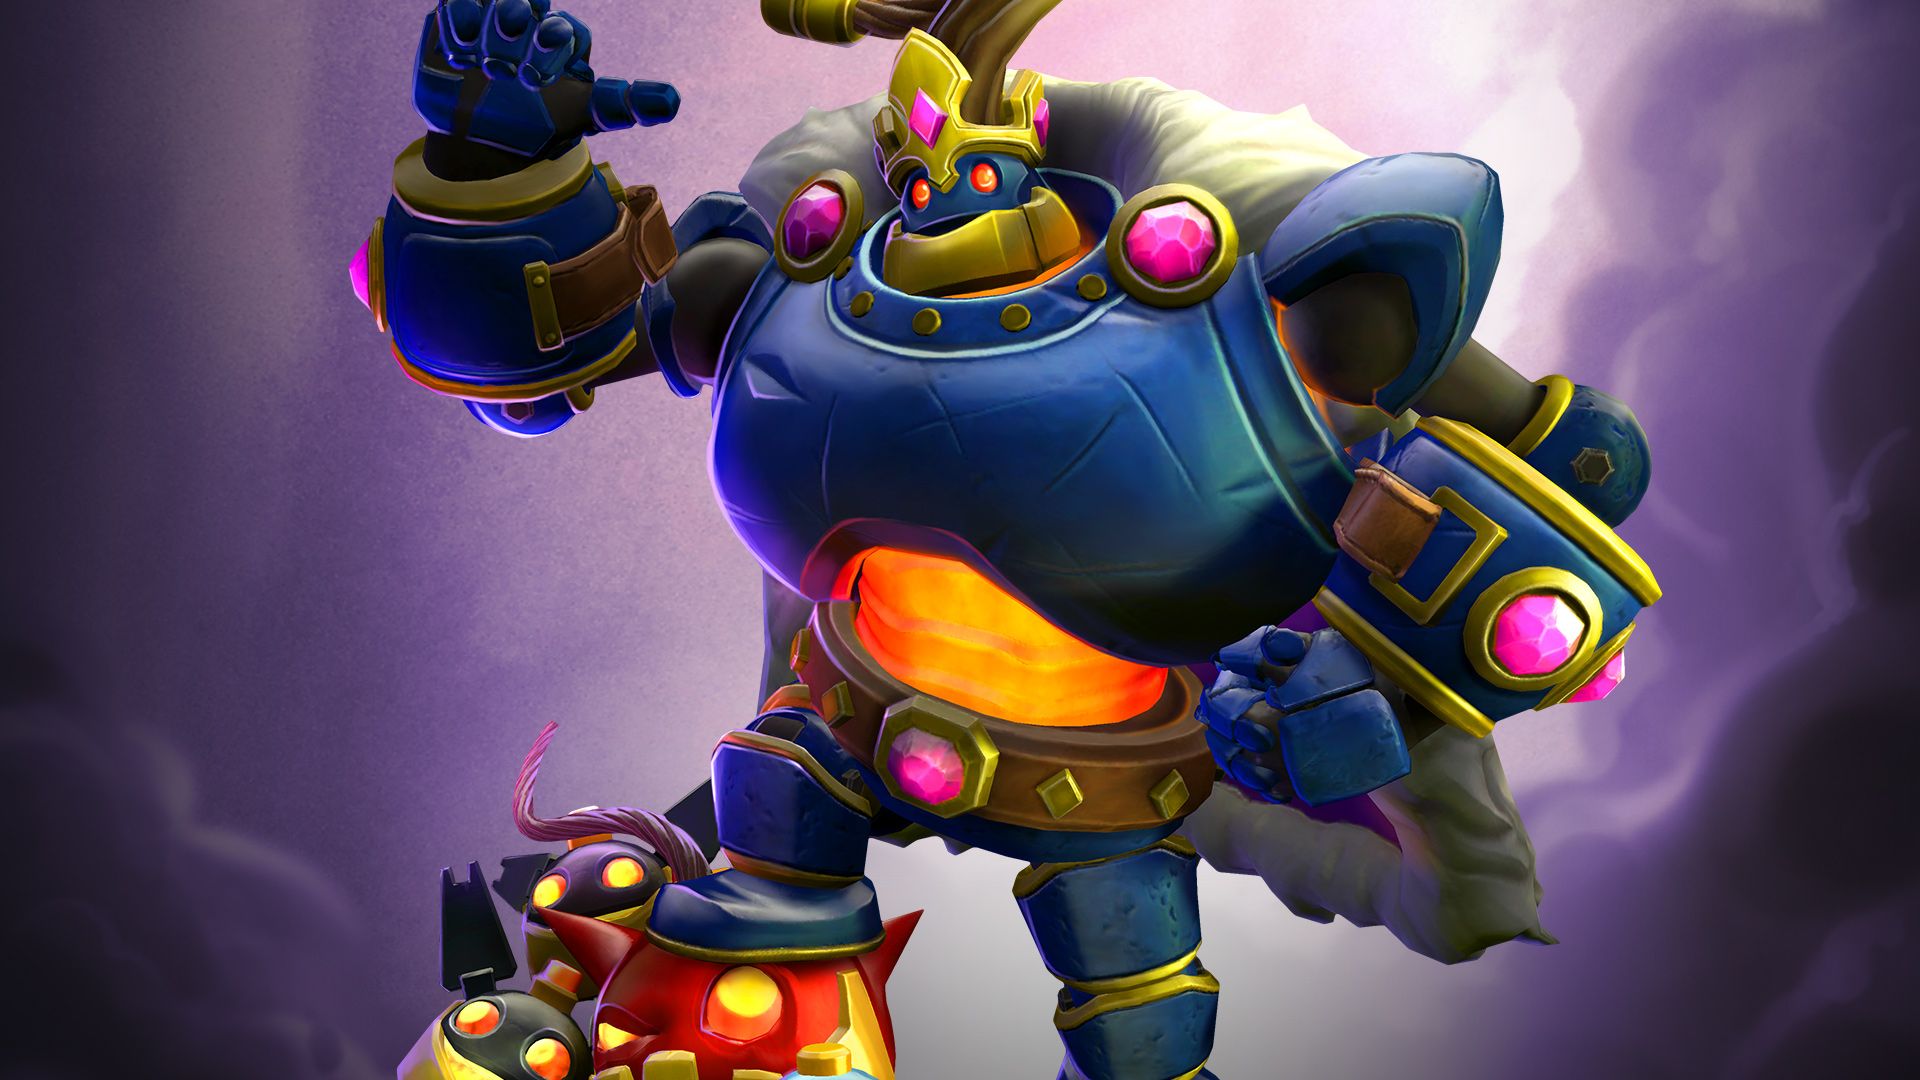 Bomb King, his majesty. Paladins: Champions of the Realm. Know